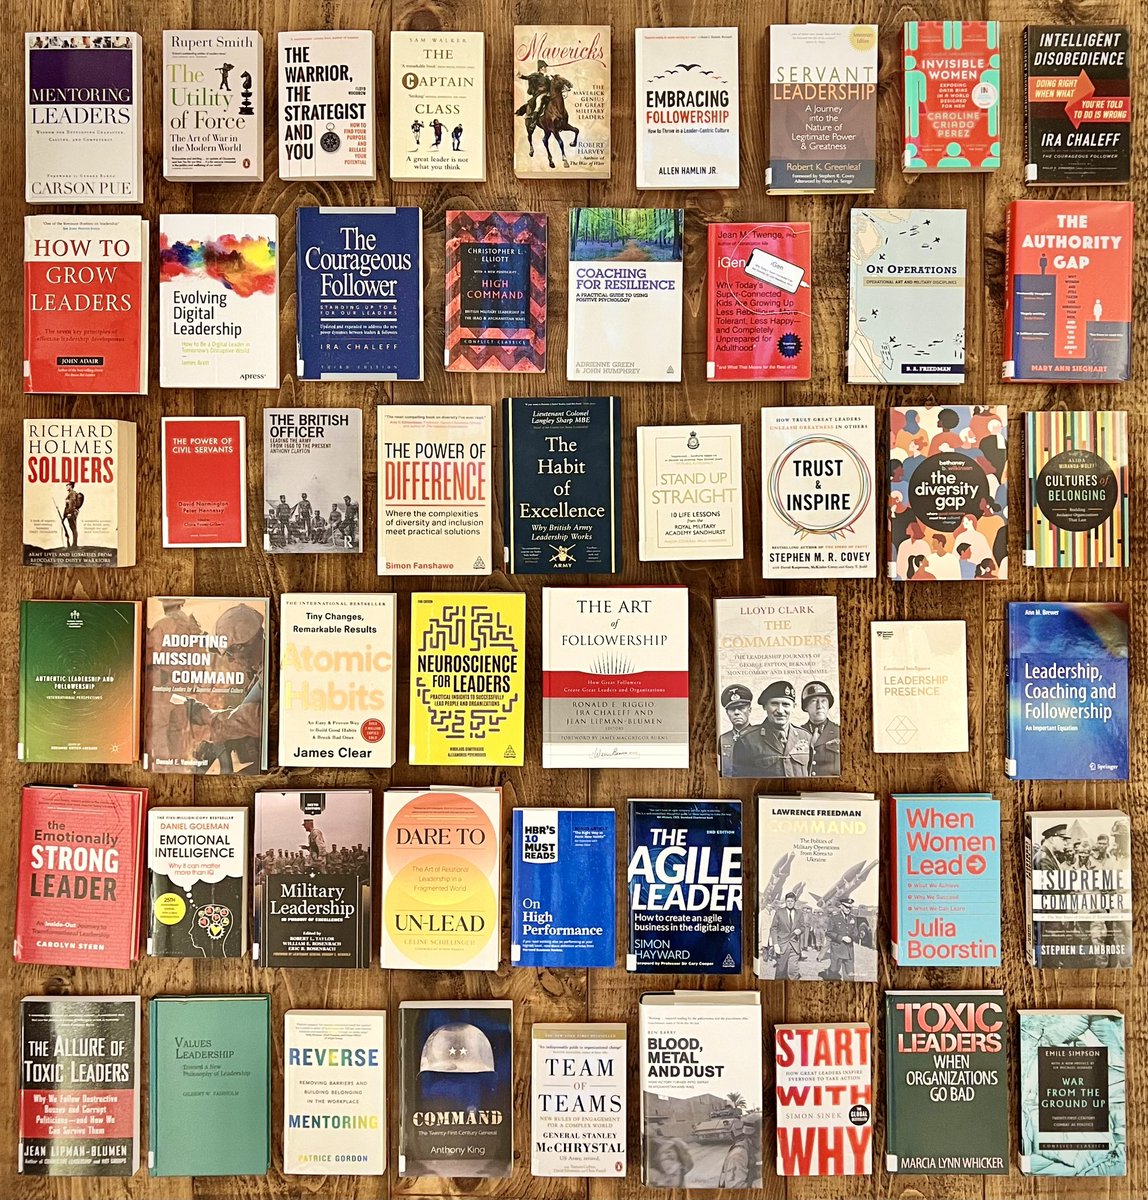 Here are 52 of our top #leadership recommended reads - one for each week of the year! How many have you read and what would you add to this list? 📚📕 📖 #readinglist #bookreview #bookrecommendations #reading #leaderdevelopment #leader #leaders #professionaldevelopment